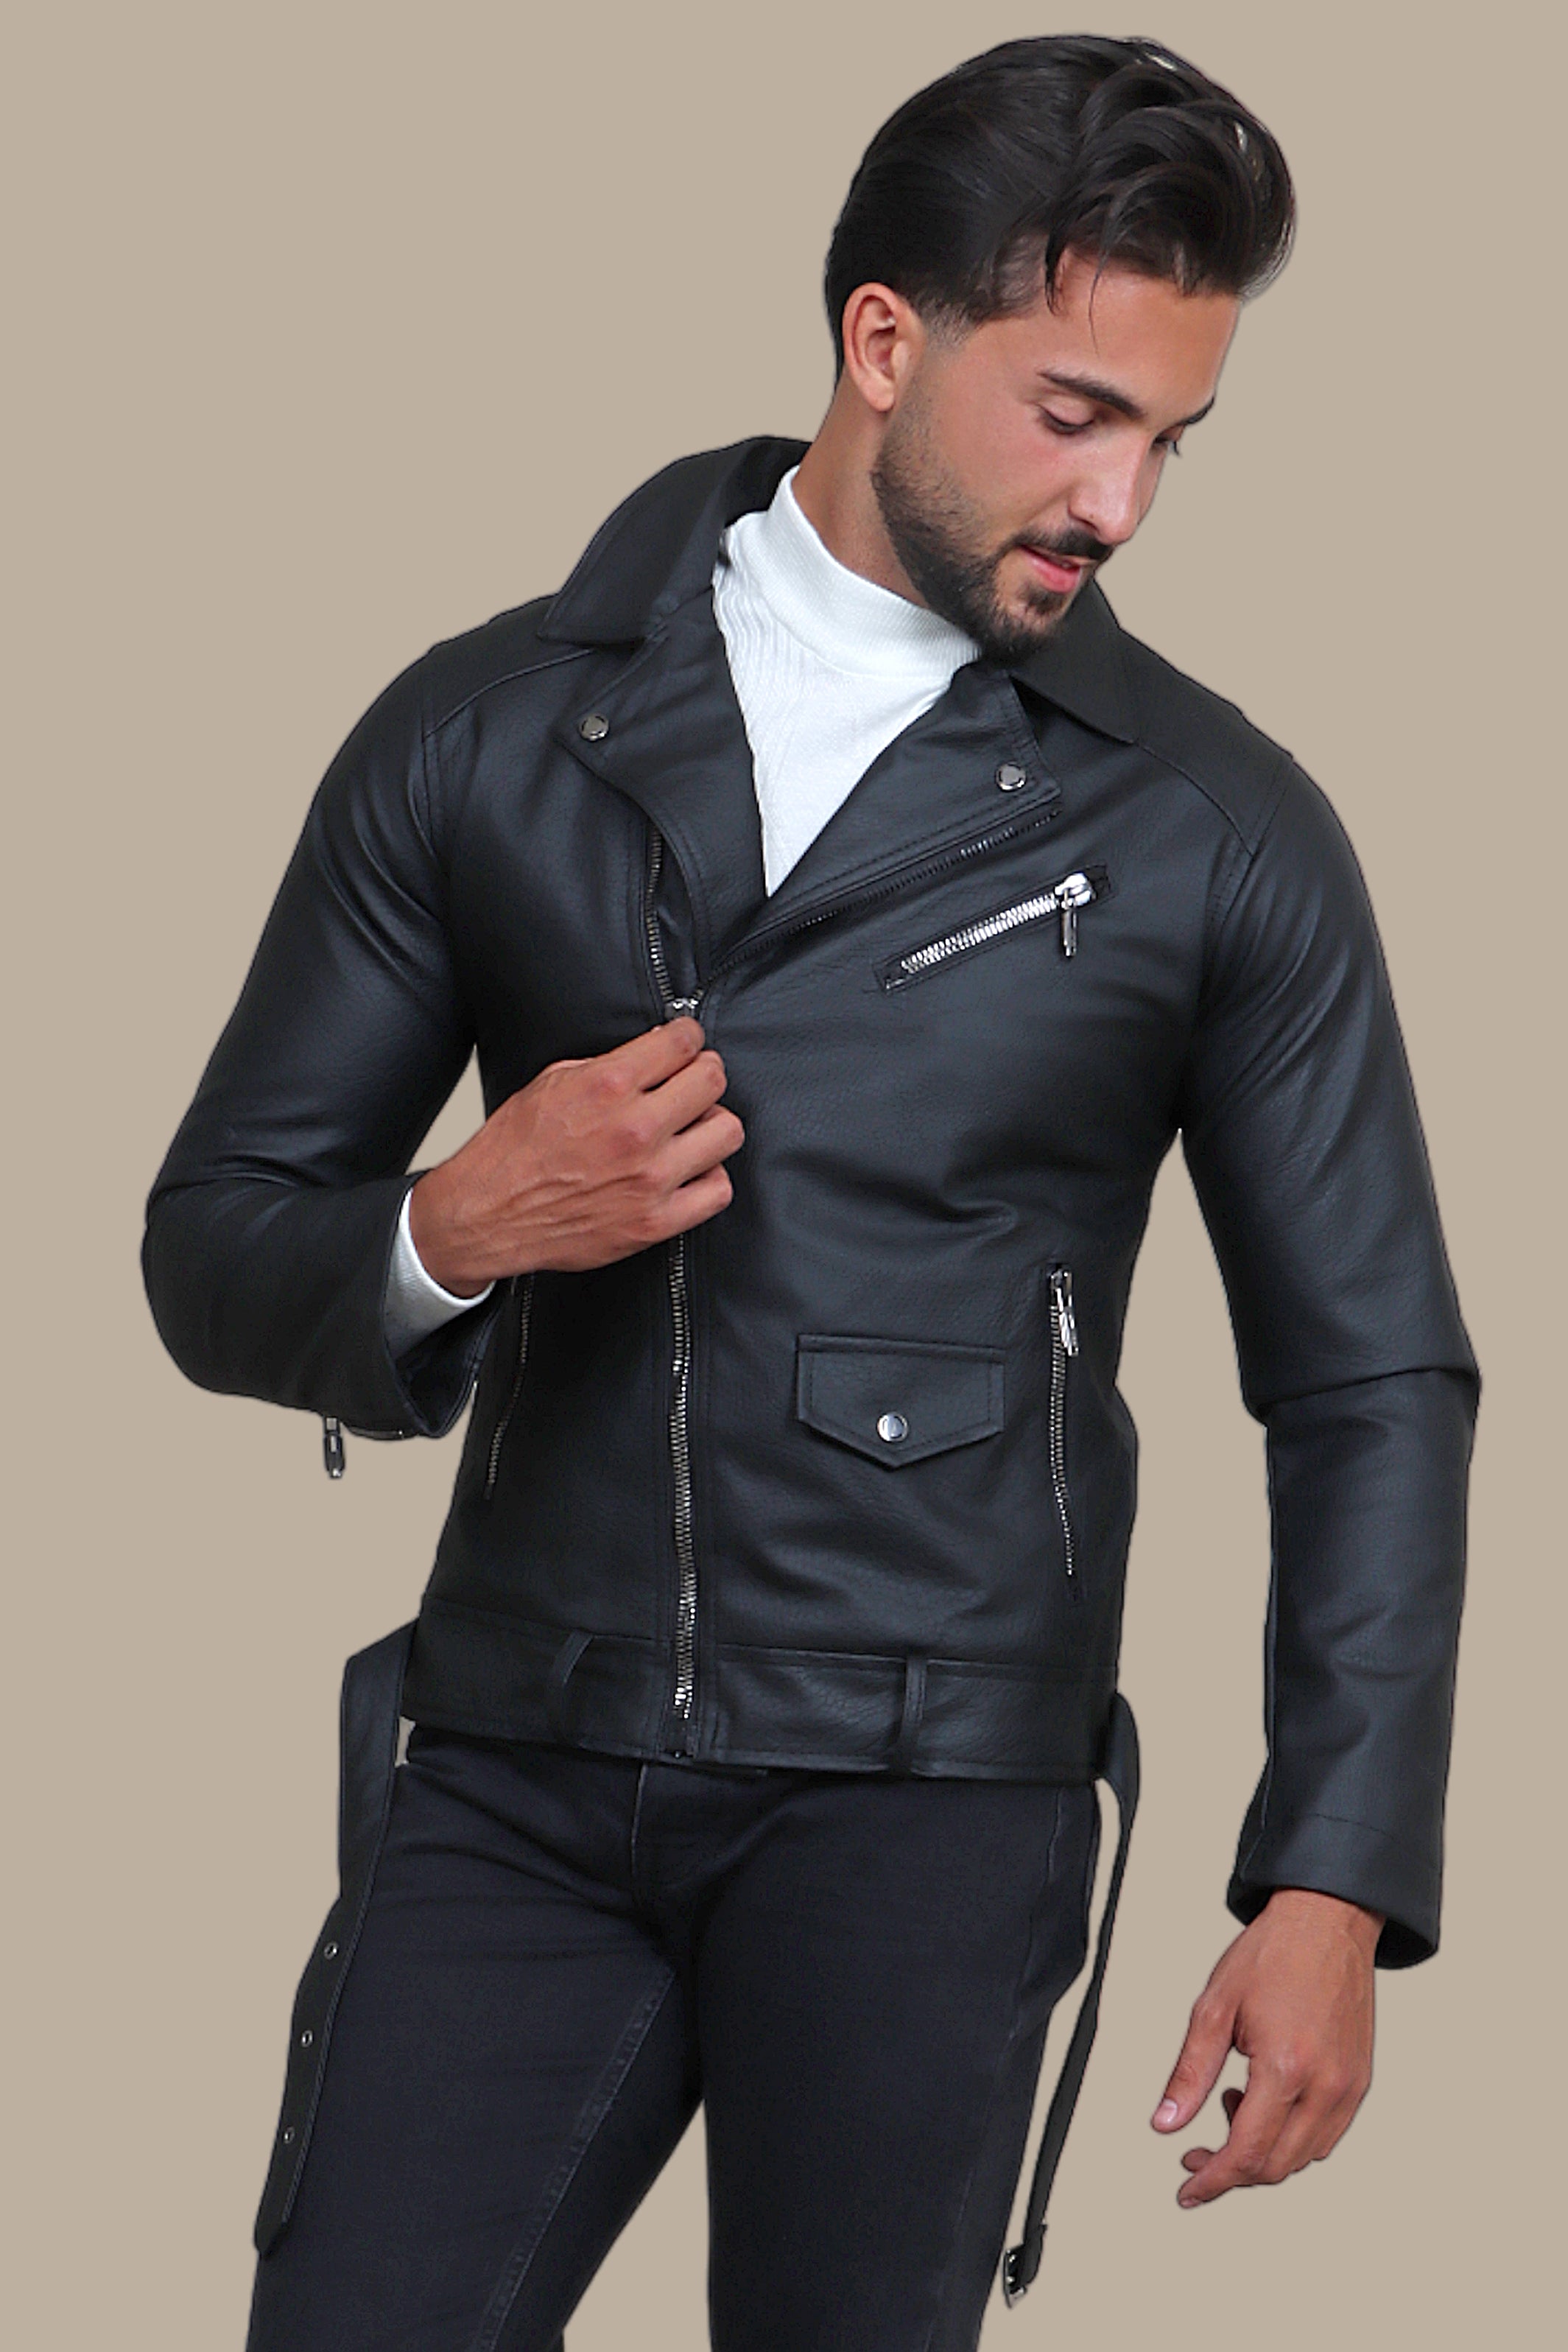 Sleek and Stylish: Faux Leather Biker Jacket with Wide Collar in Structured Black